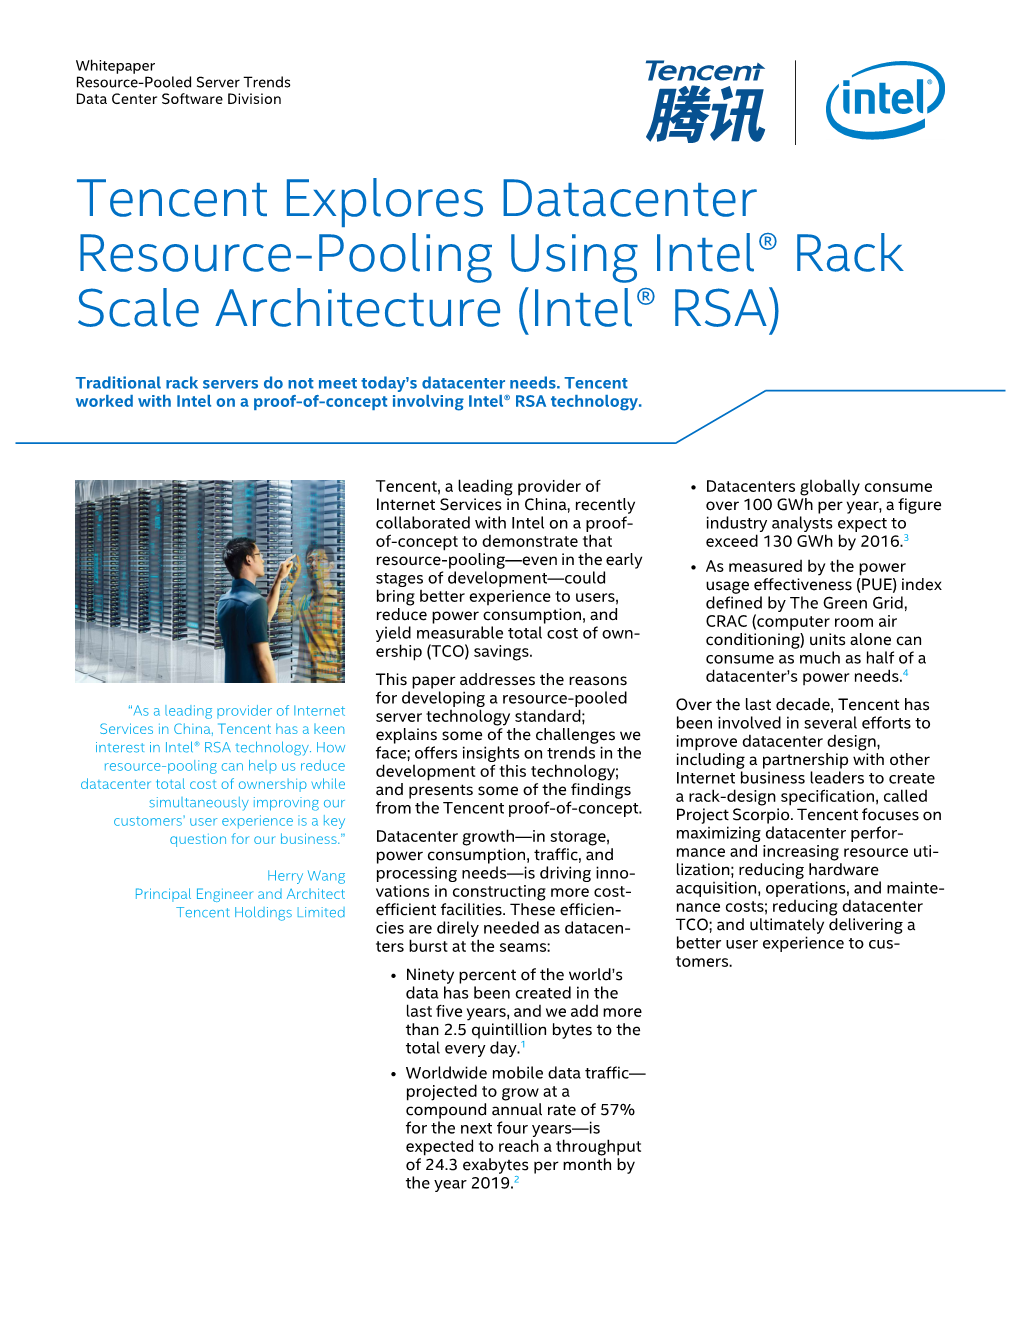 Tencent Explores Datacenter Resource-Pooling Using Intel® Rack Scale Architecture (Intel® RSA)